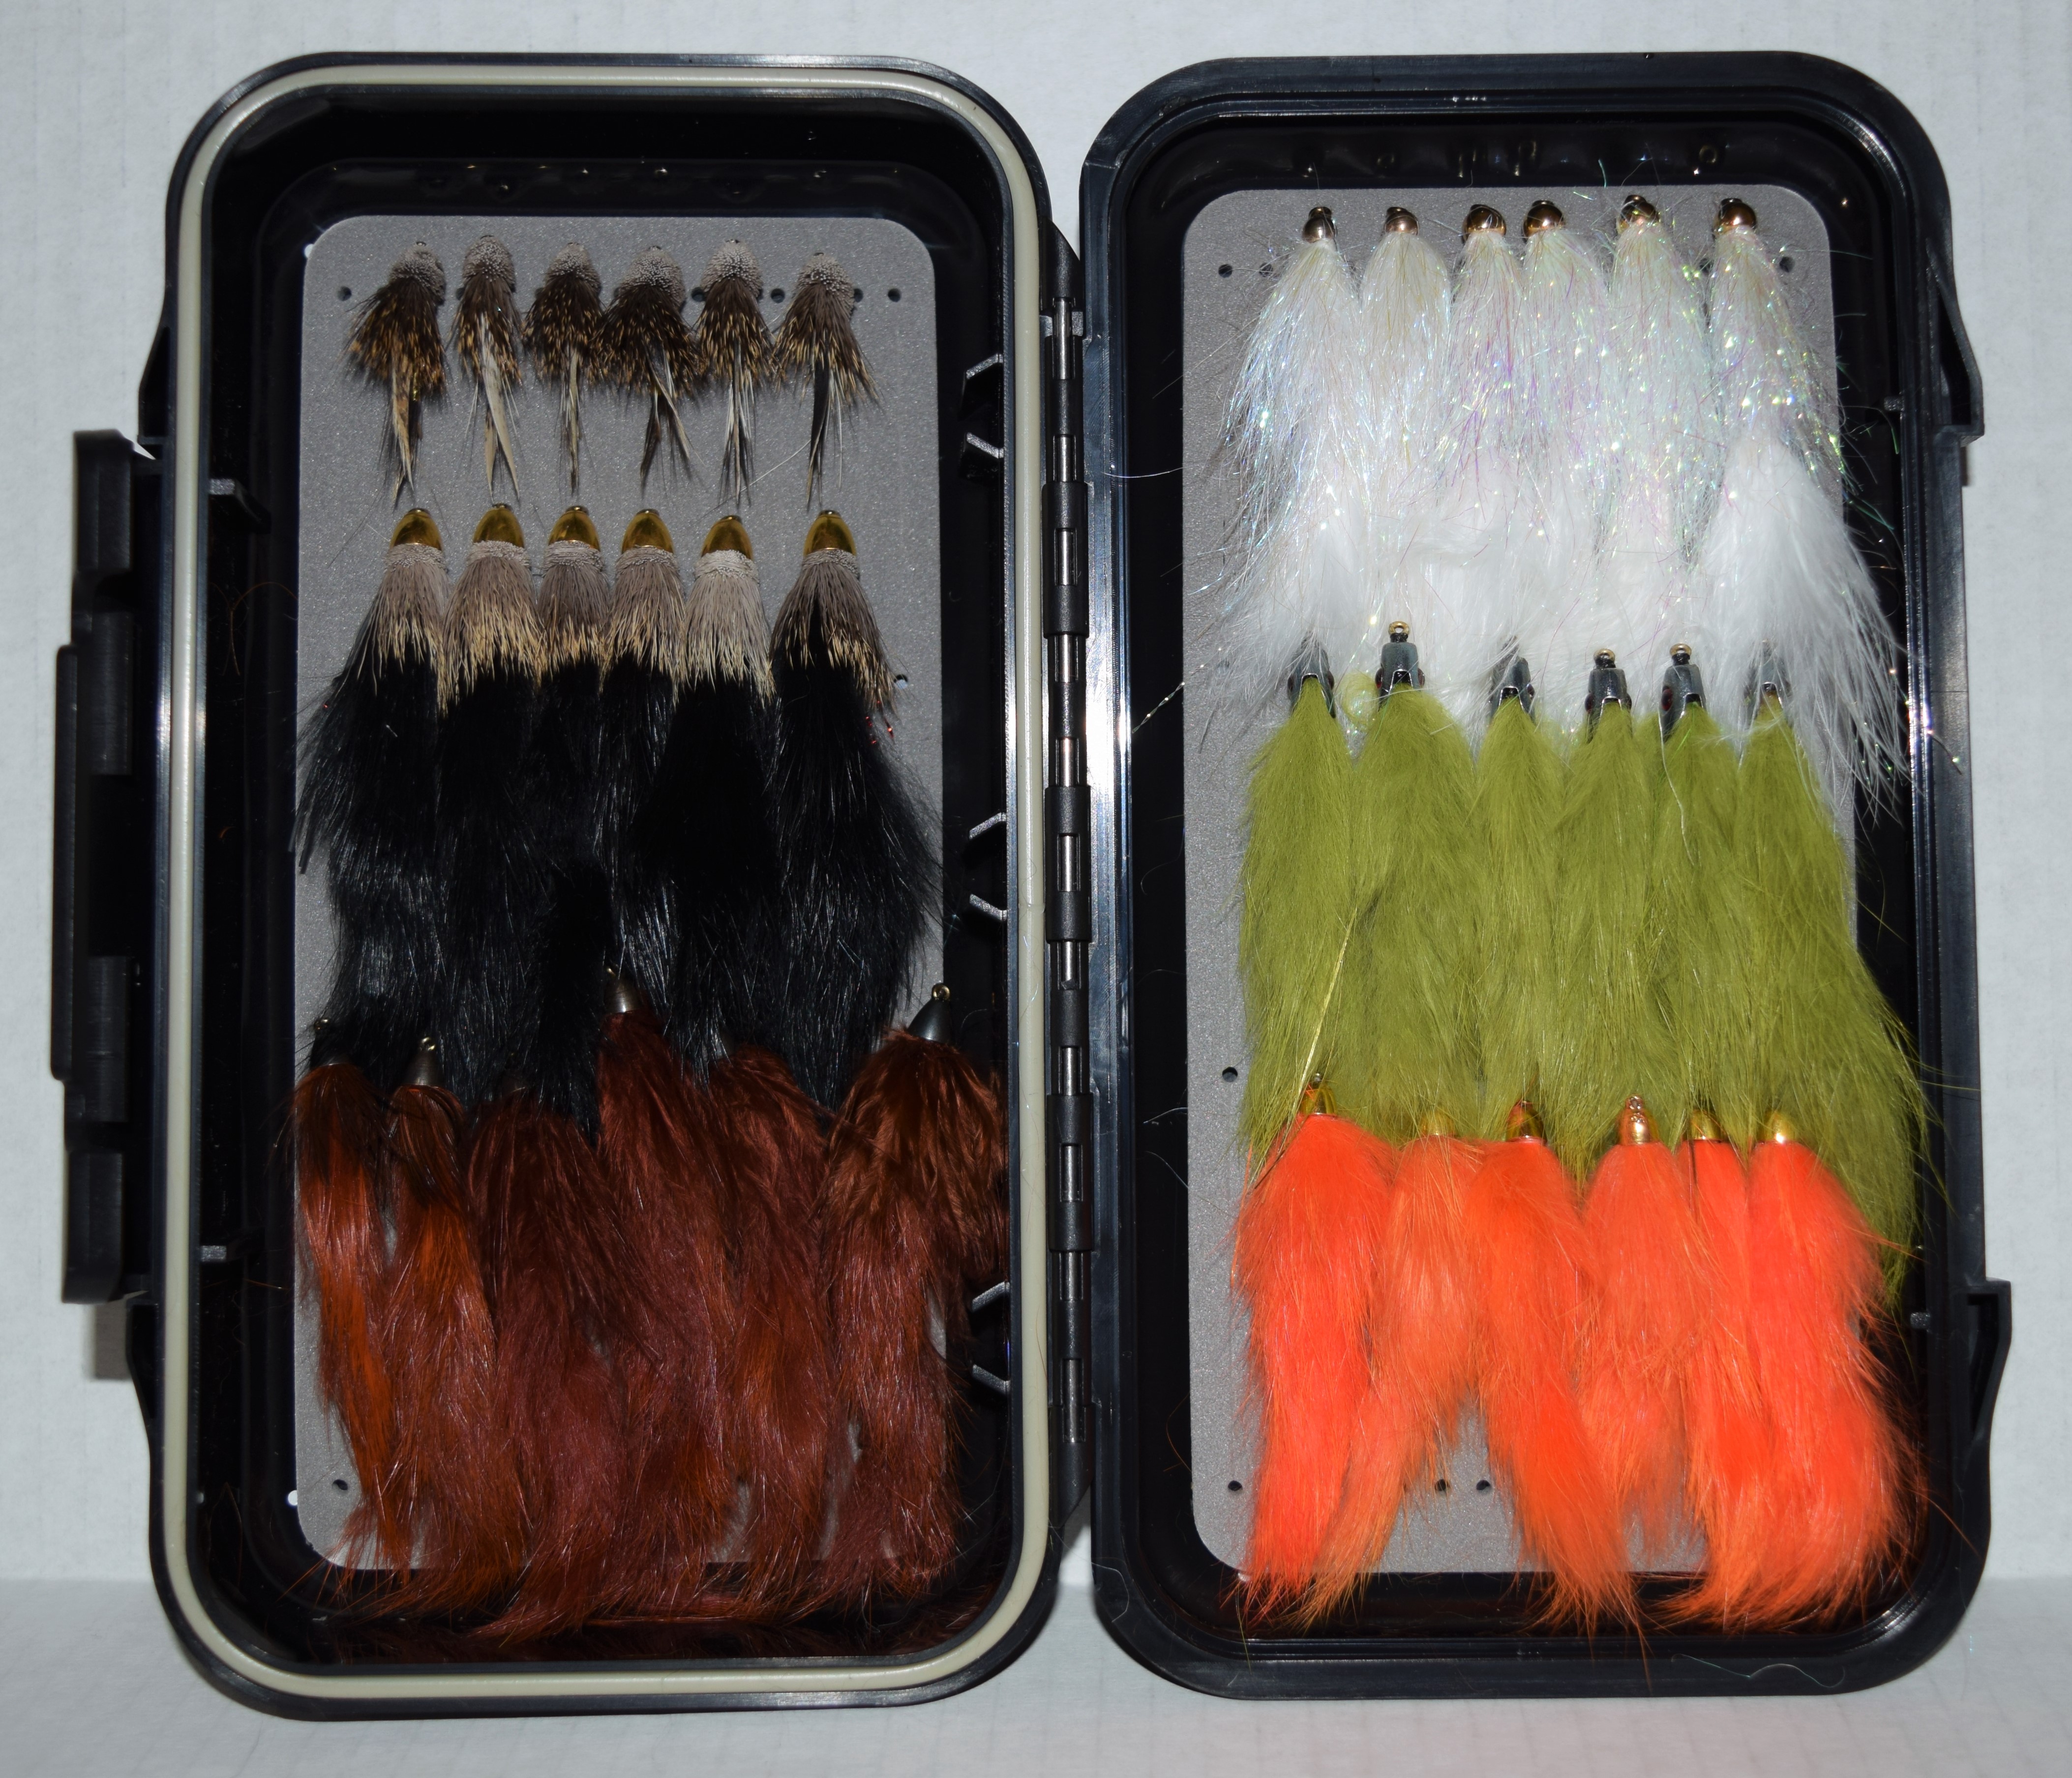 A Review of Streamer Fly Boxes for Big Flies - Guide Recommended